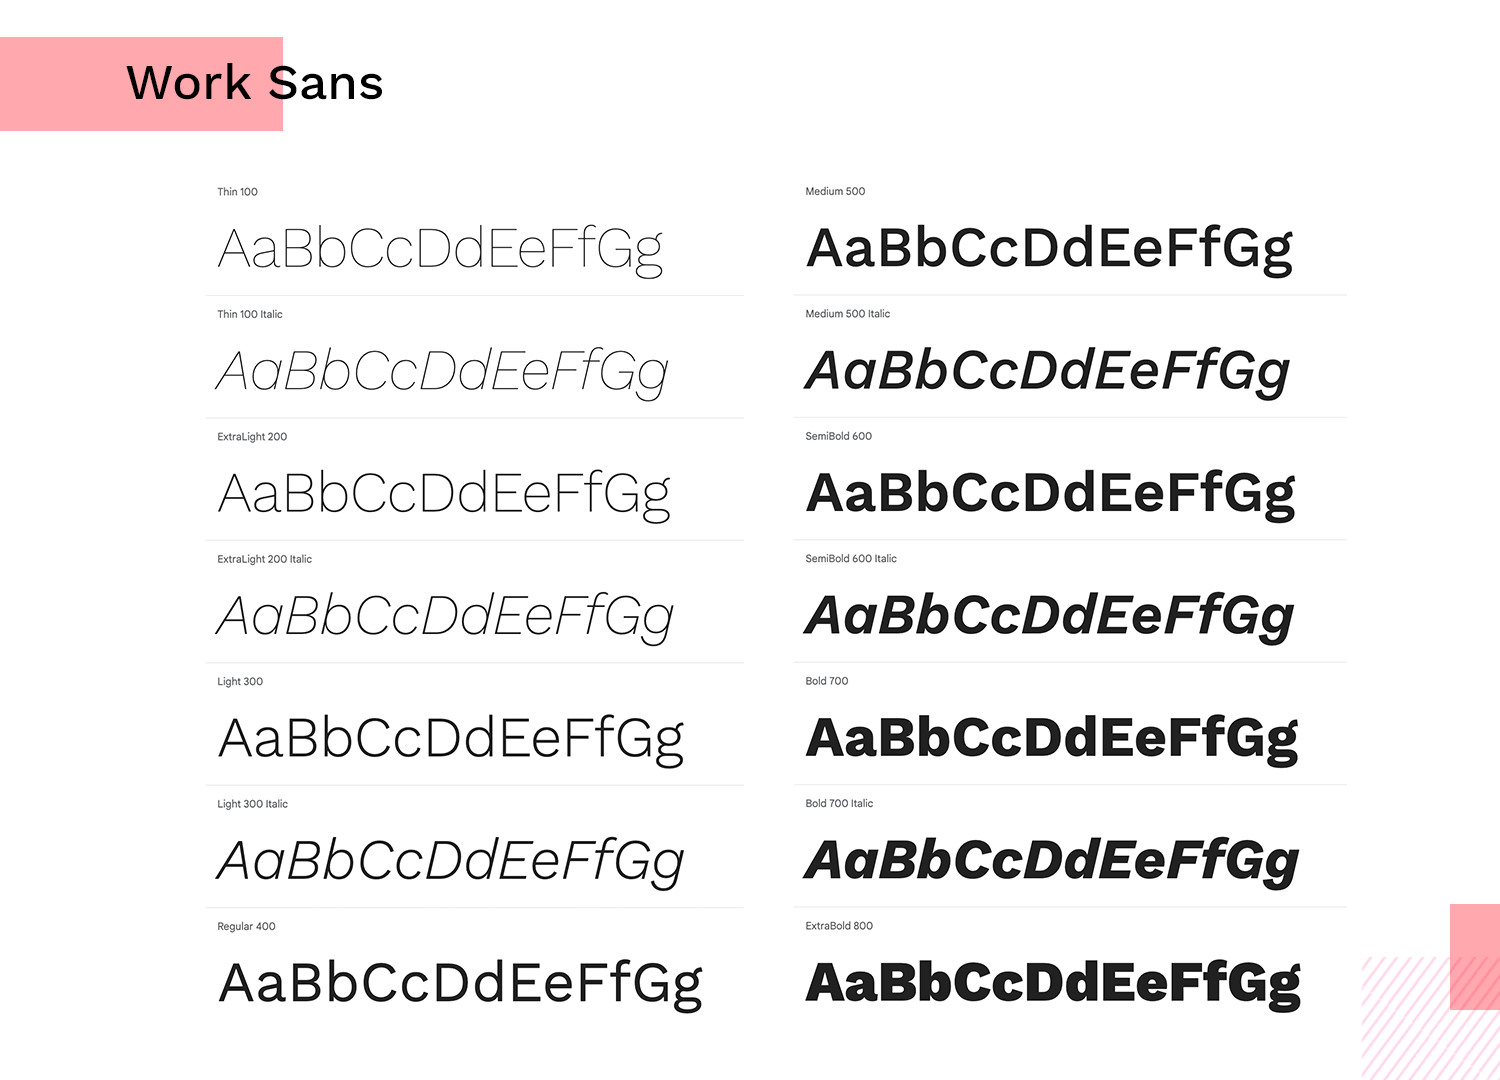 Work Sans font variations in bold, italic, regular, and book styles